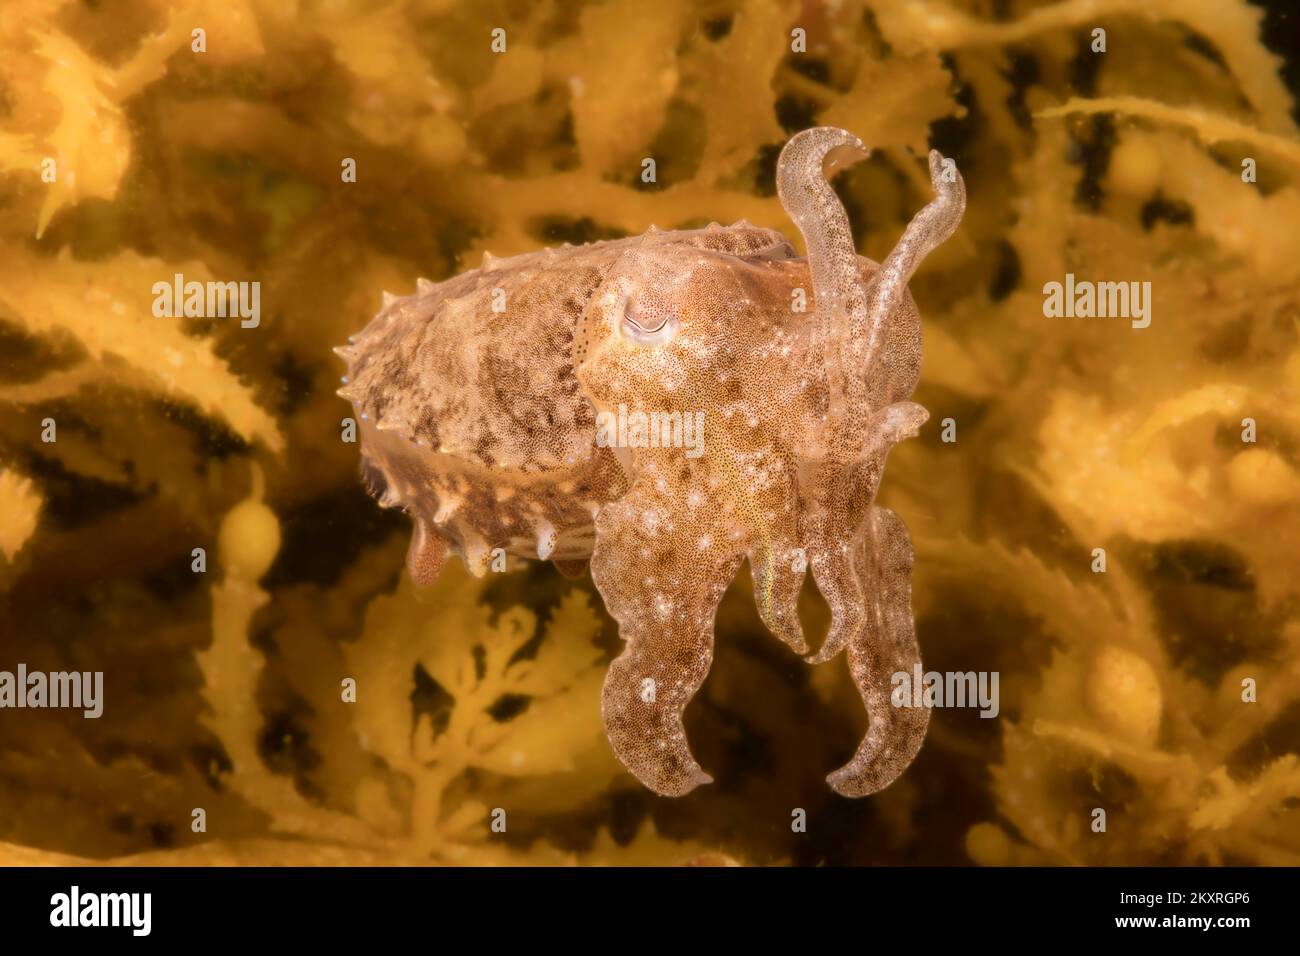 The stumpy-spined cuttlefish, Sepia bandensis, is common on coral reefs, and is just two inches long, Philippines. Stock Photo